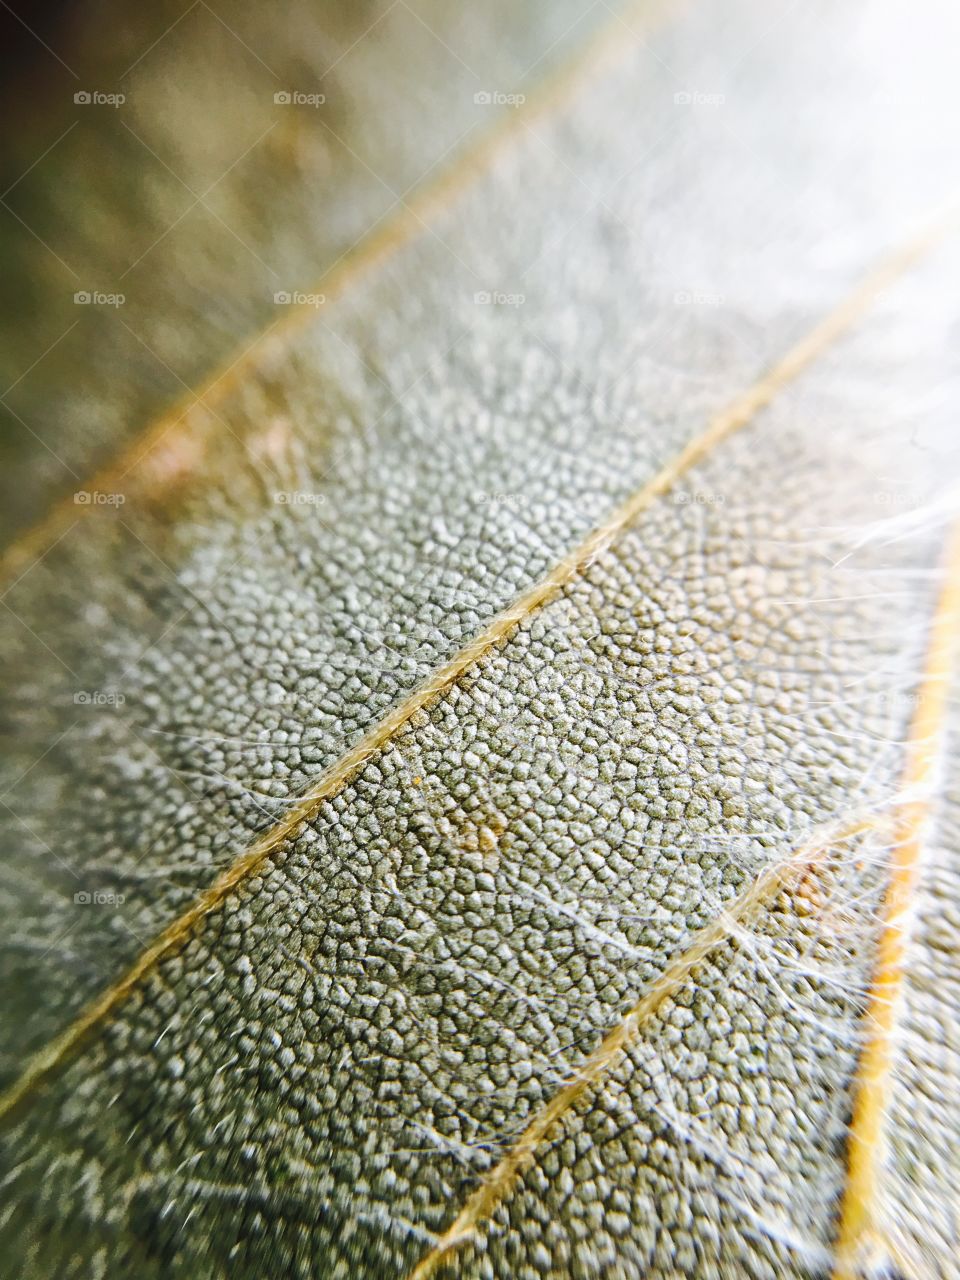 Extreme close up of a leaf.